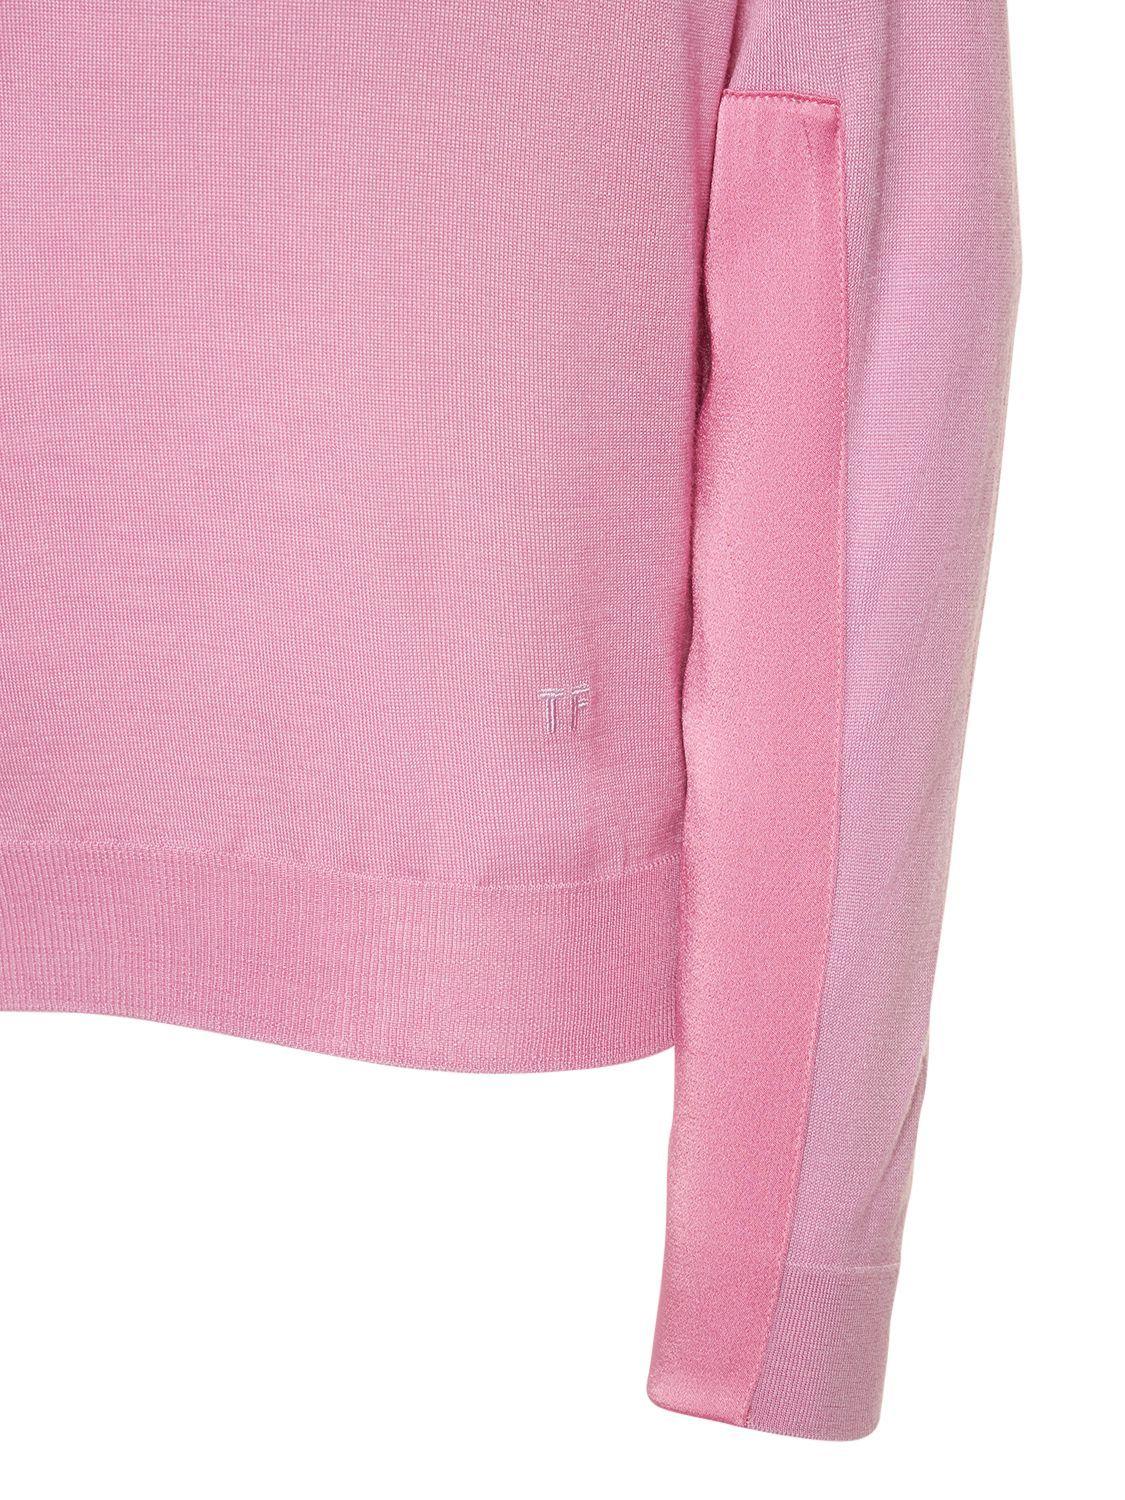 Tom Ford Cashmere & Silk Satin Vneck Knit Sweater in Pink | Lyst